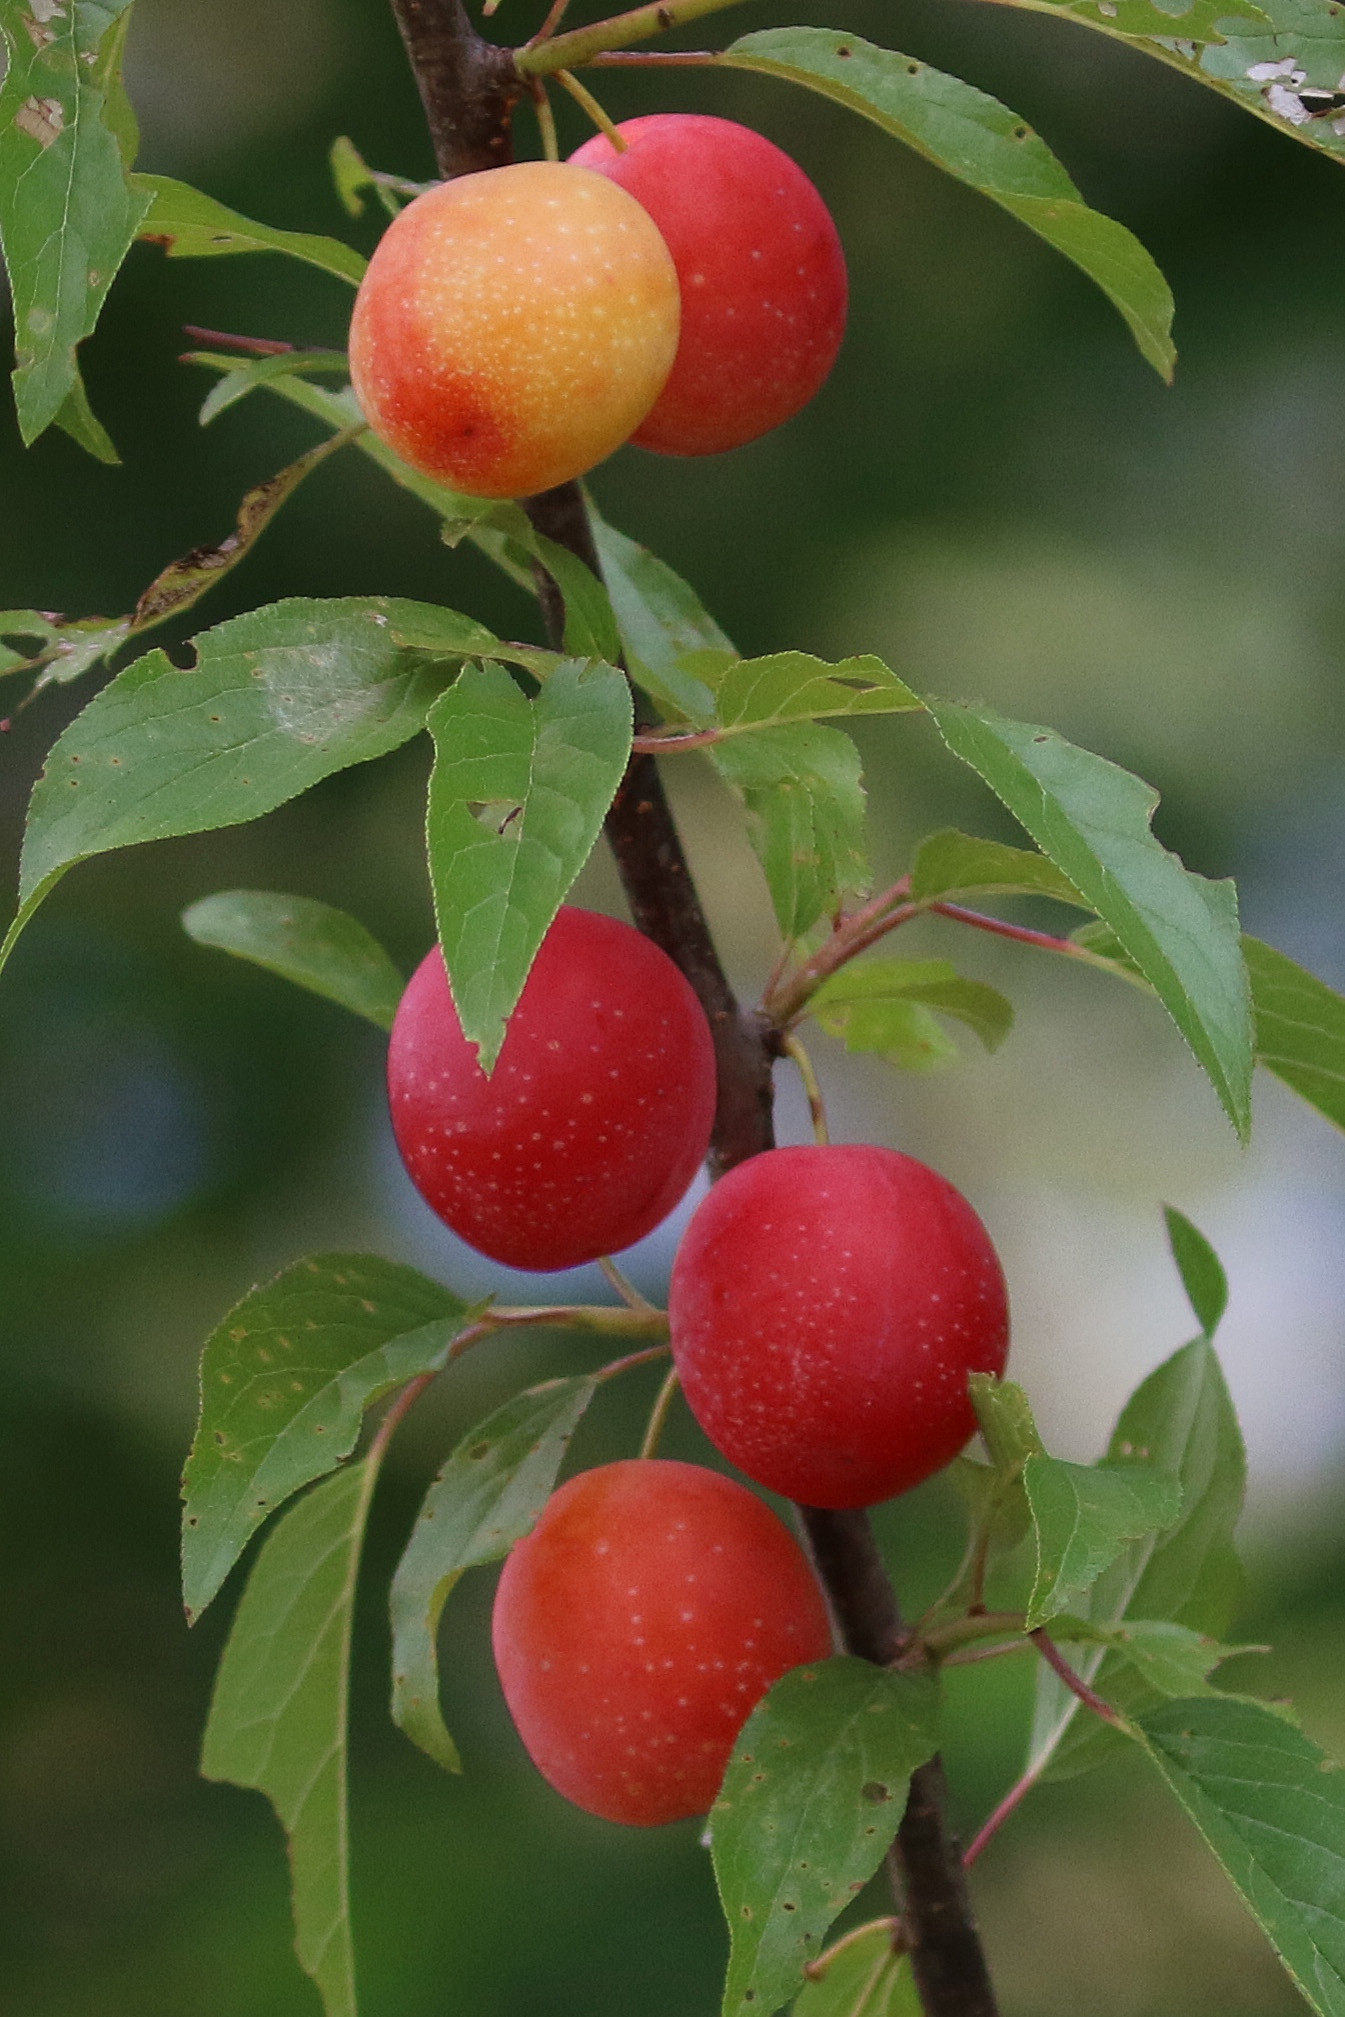 The Scientific Name is Prunus angustifolia. You will likely hear them called Chickasaw Plum. This picture shows the Small bright red plums mature by early June. of Prunus angustifolia